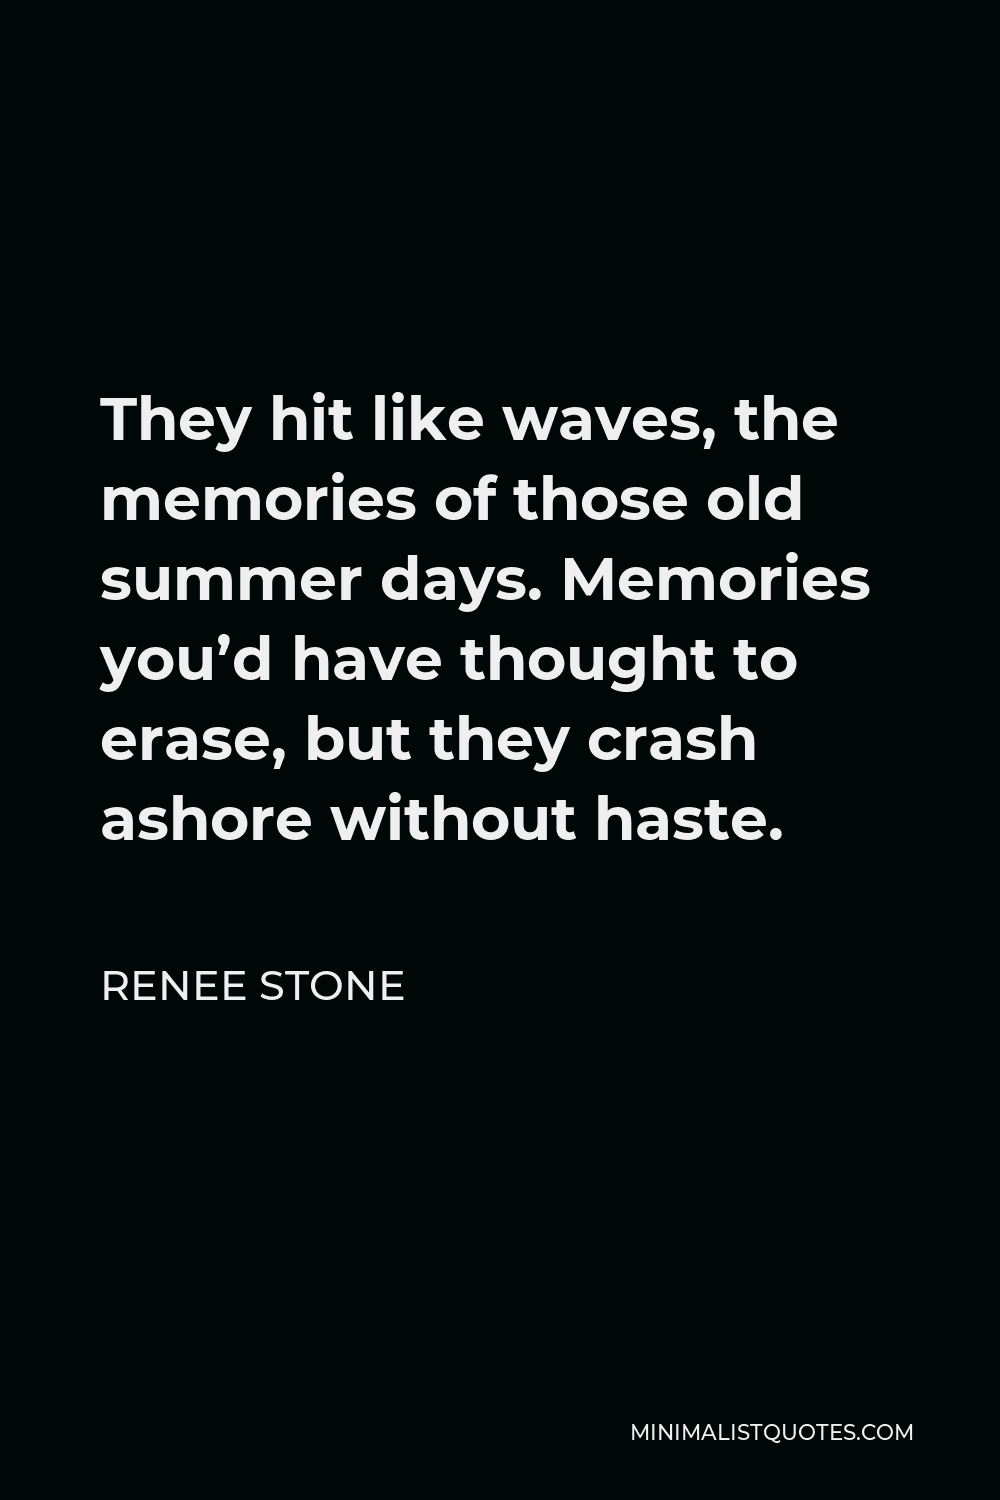 Renee Stone Quote - They hit like waves, the memories of those old summer days. Memories you’d have thought to erase, but they crash ashore without haste.